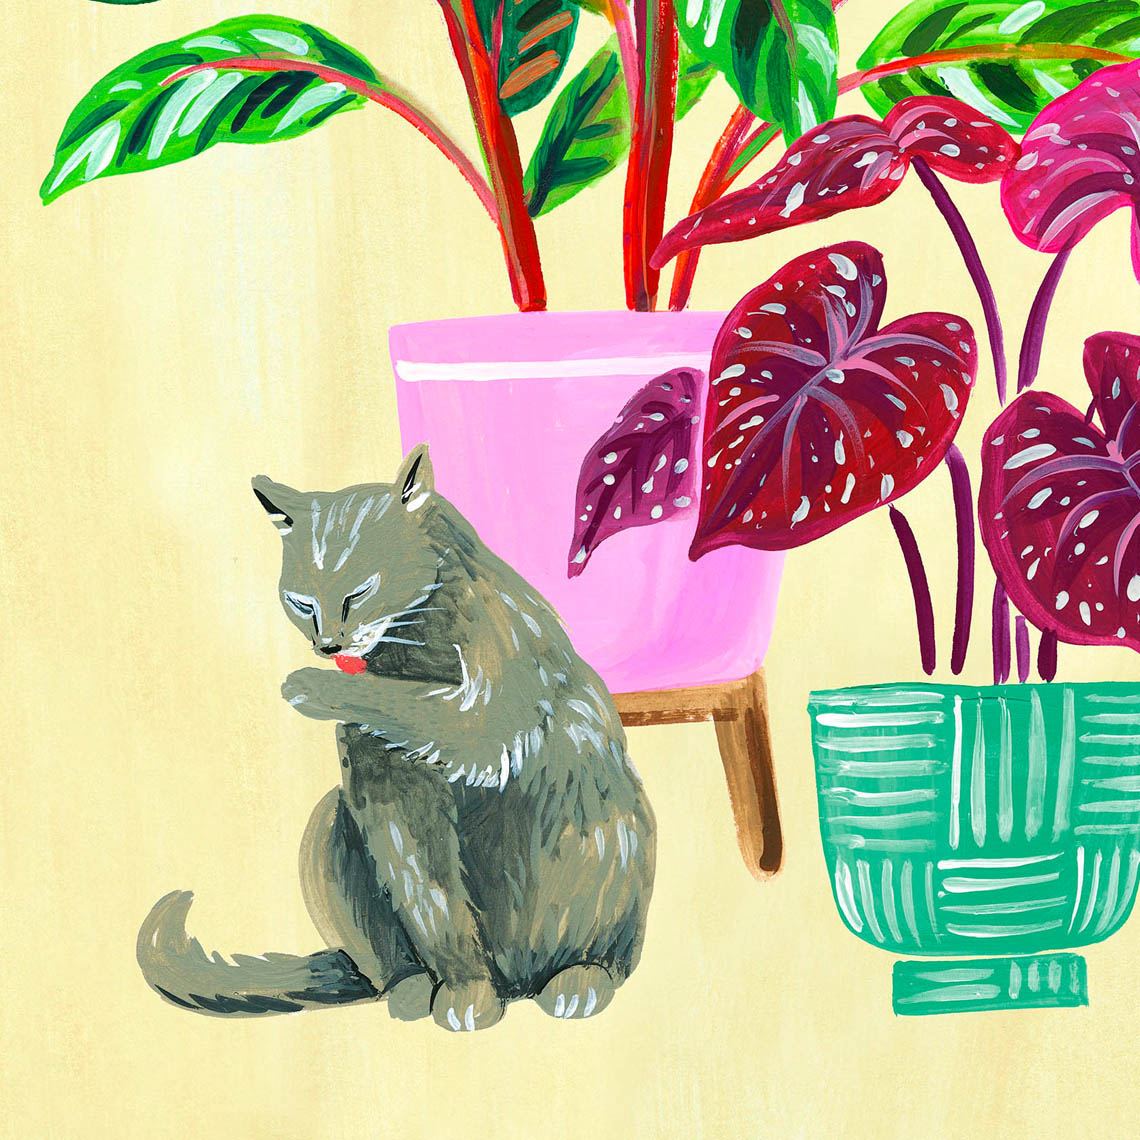 Gray cat and houseplant illustration detail